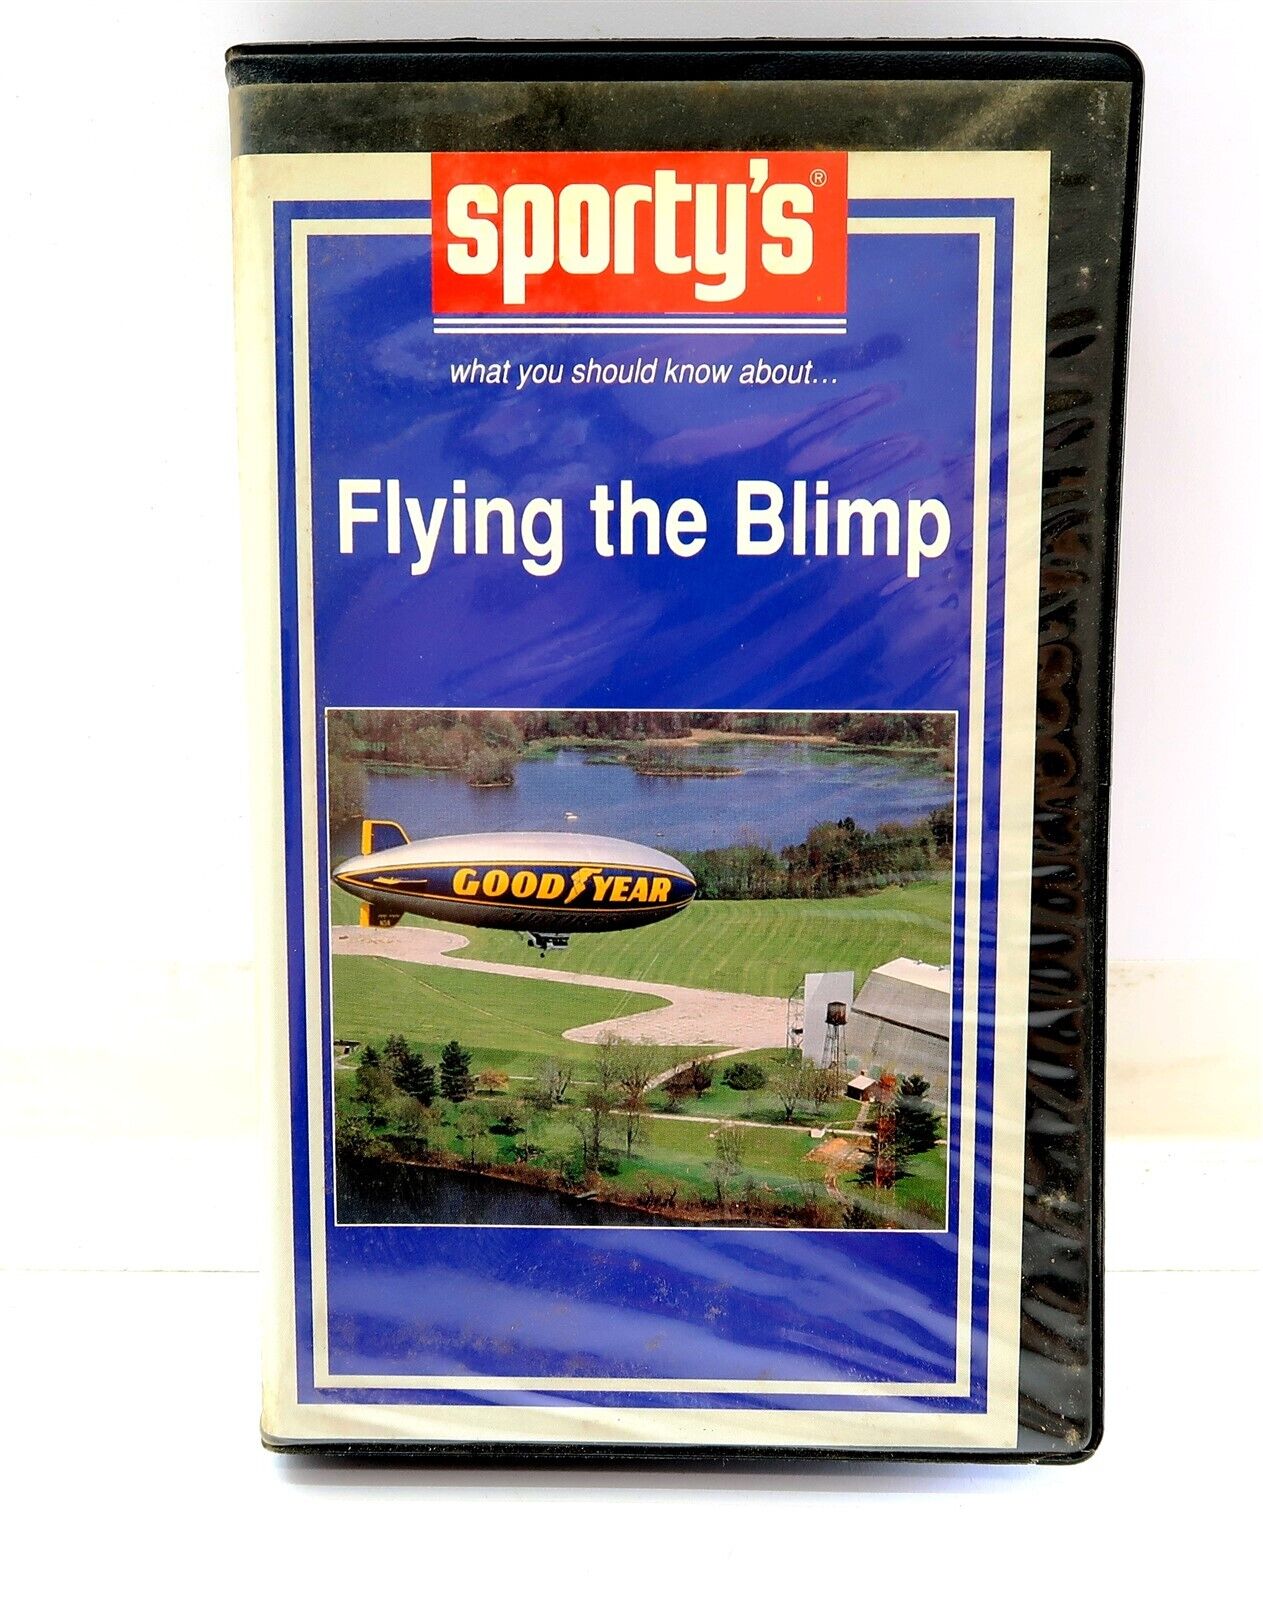 FLYING THE BLIMP VHS VCR Tape by Sporty\'s Pilot Shop Circa 1993